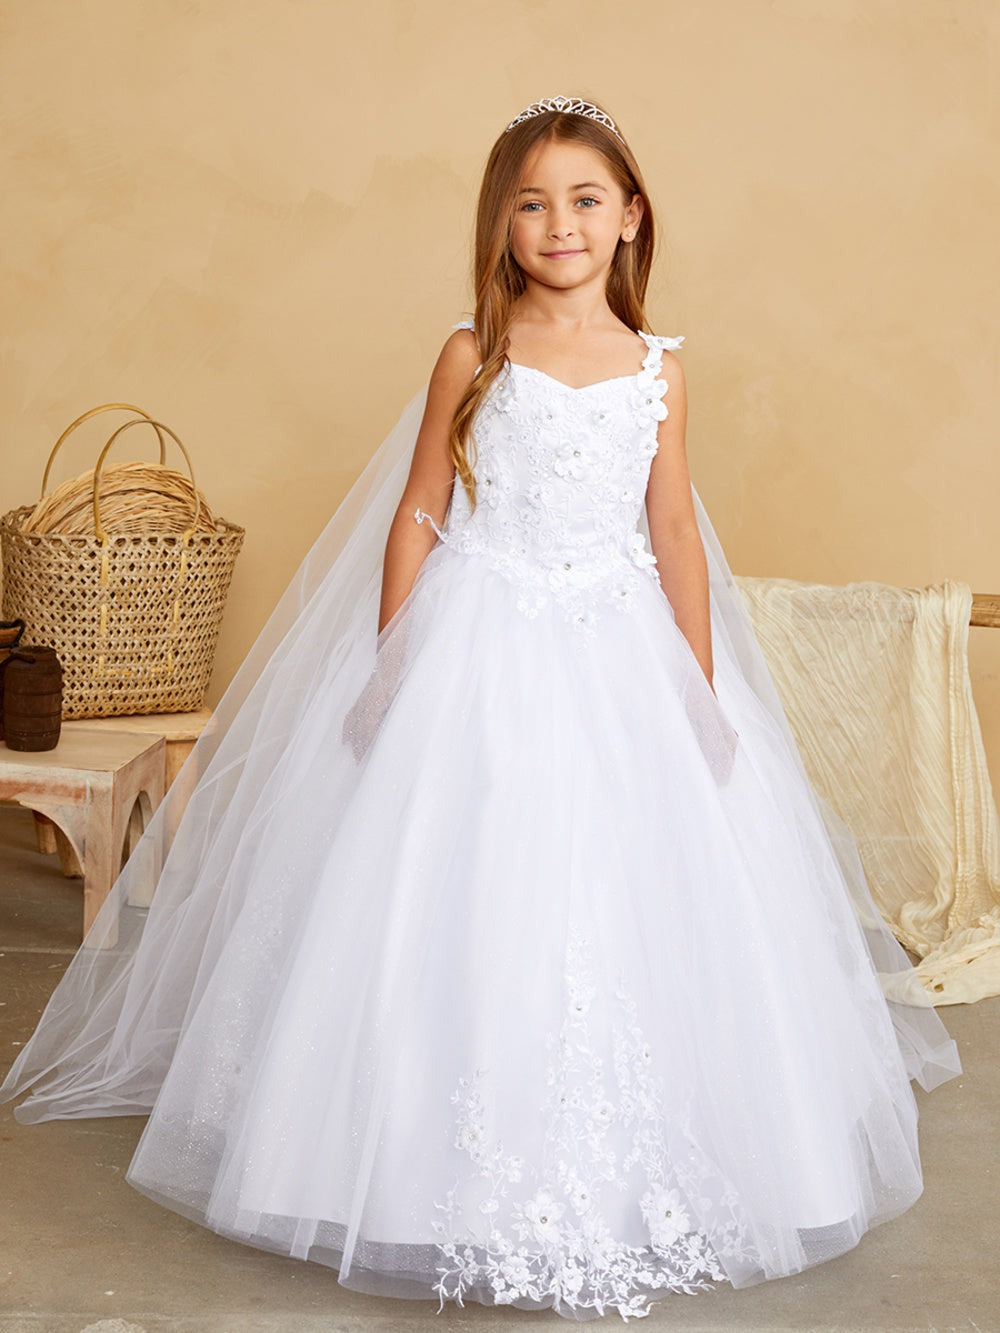 NorasBridalBoutiqueNY Daisy Flower Girl Gown